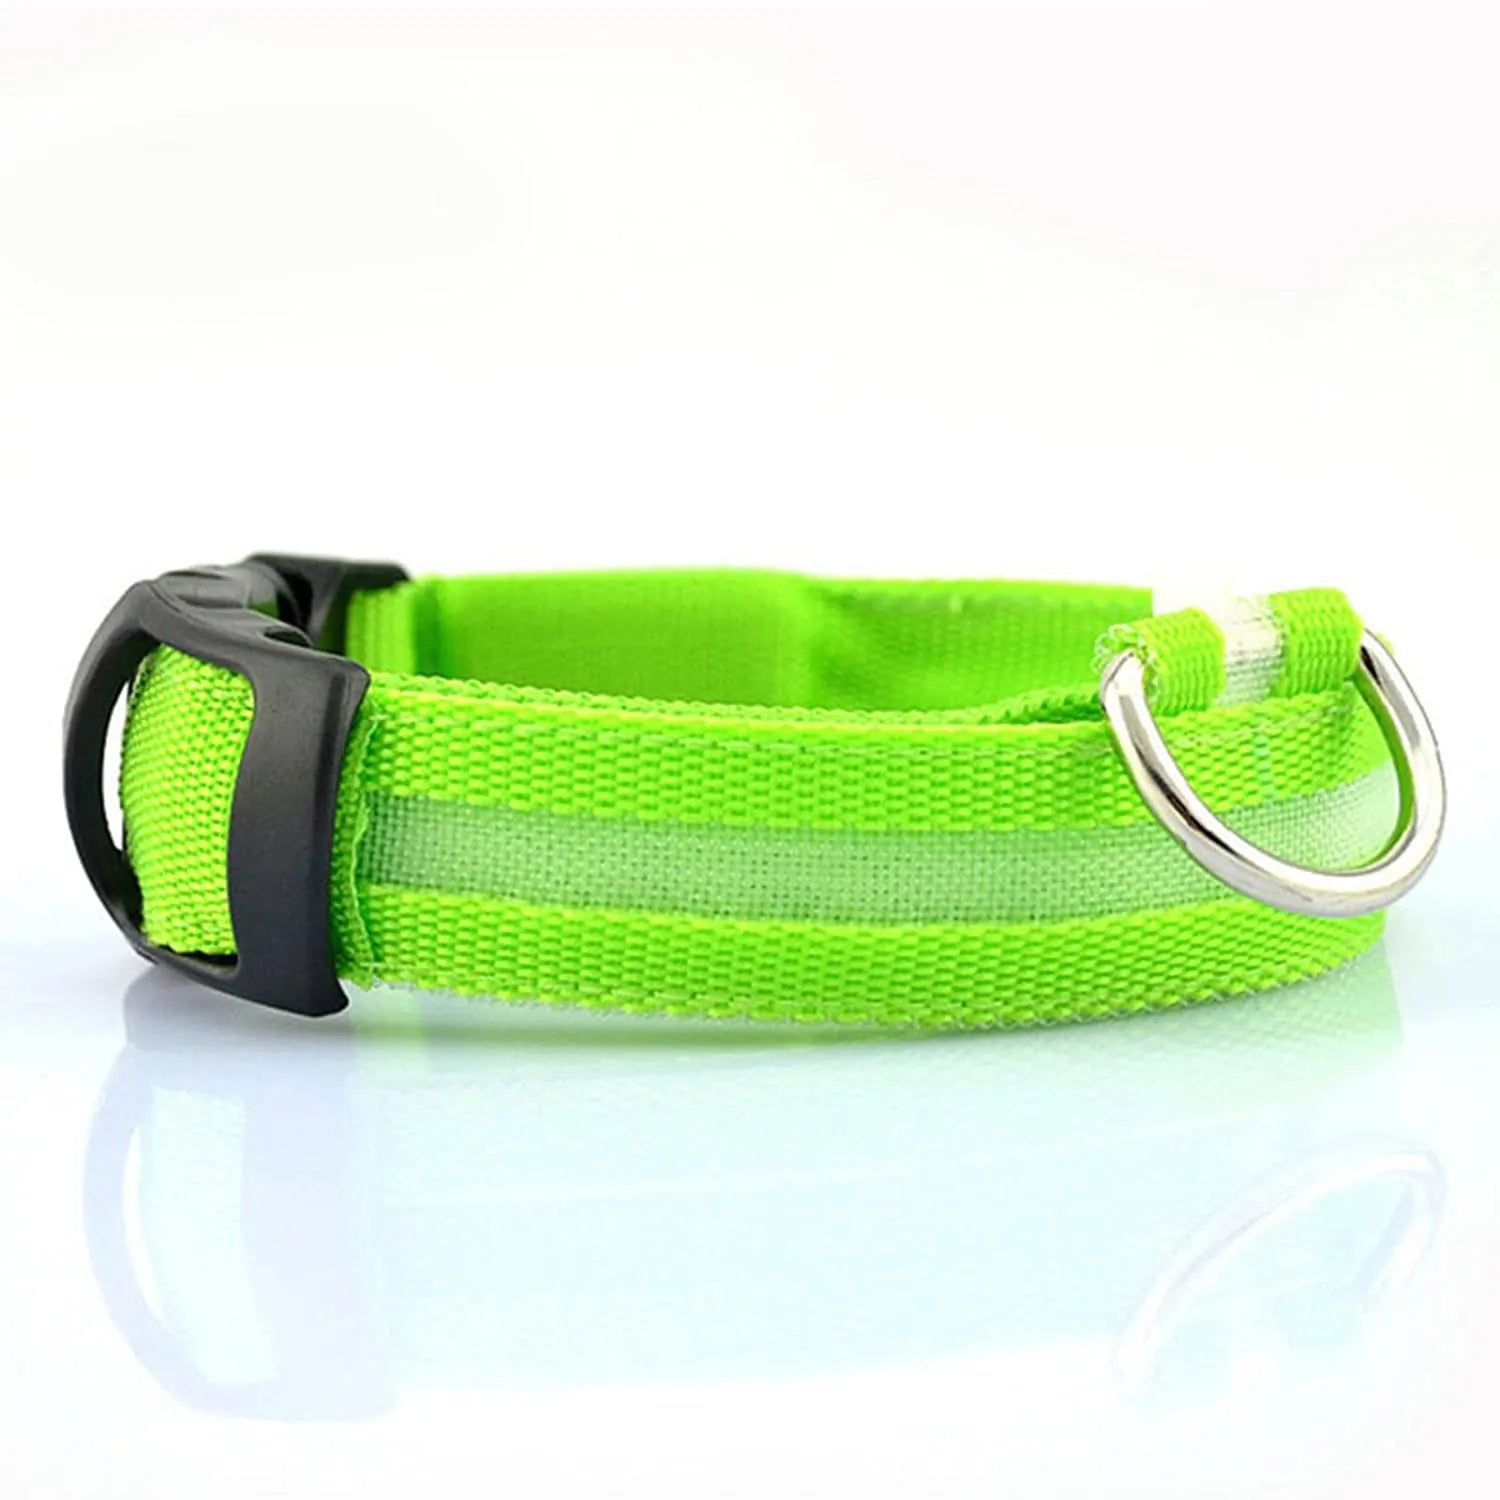 GlowGuard LED Dog Collar: Keep Your Pet Safe and Stylish in the Dark Green battery / XS neck 28-40cm - IHavePaws